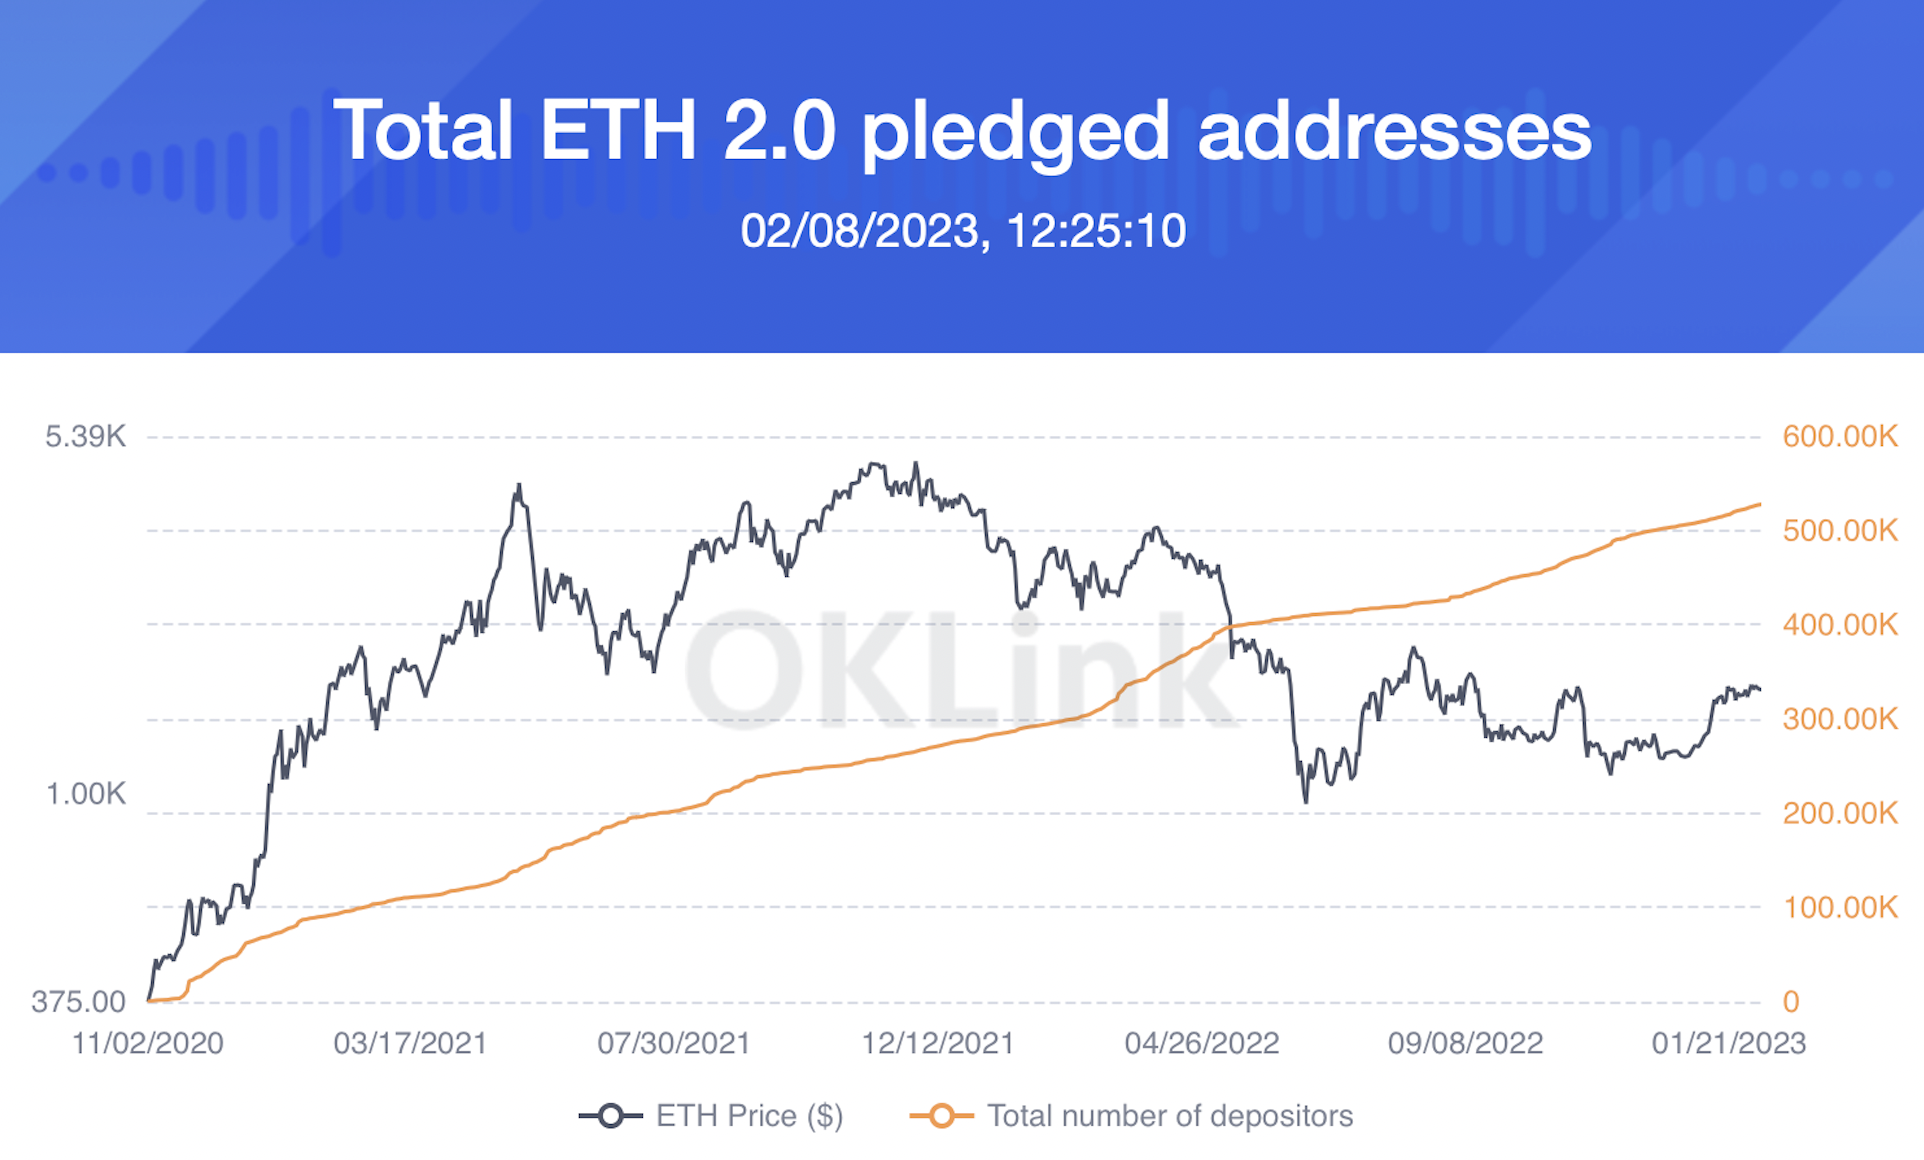 ETH 2.0 addresses that staked Ethereum